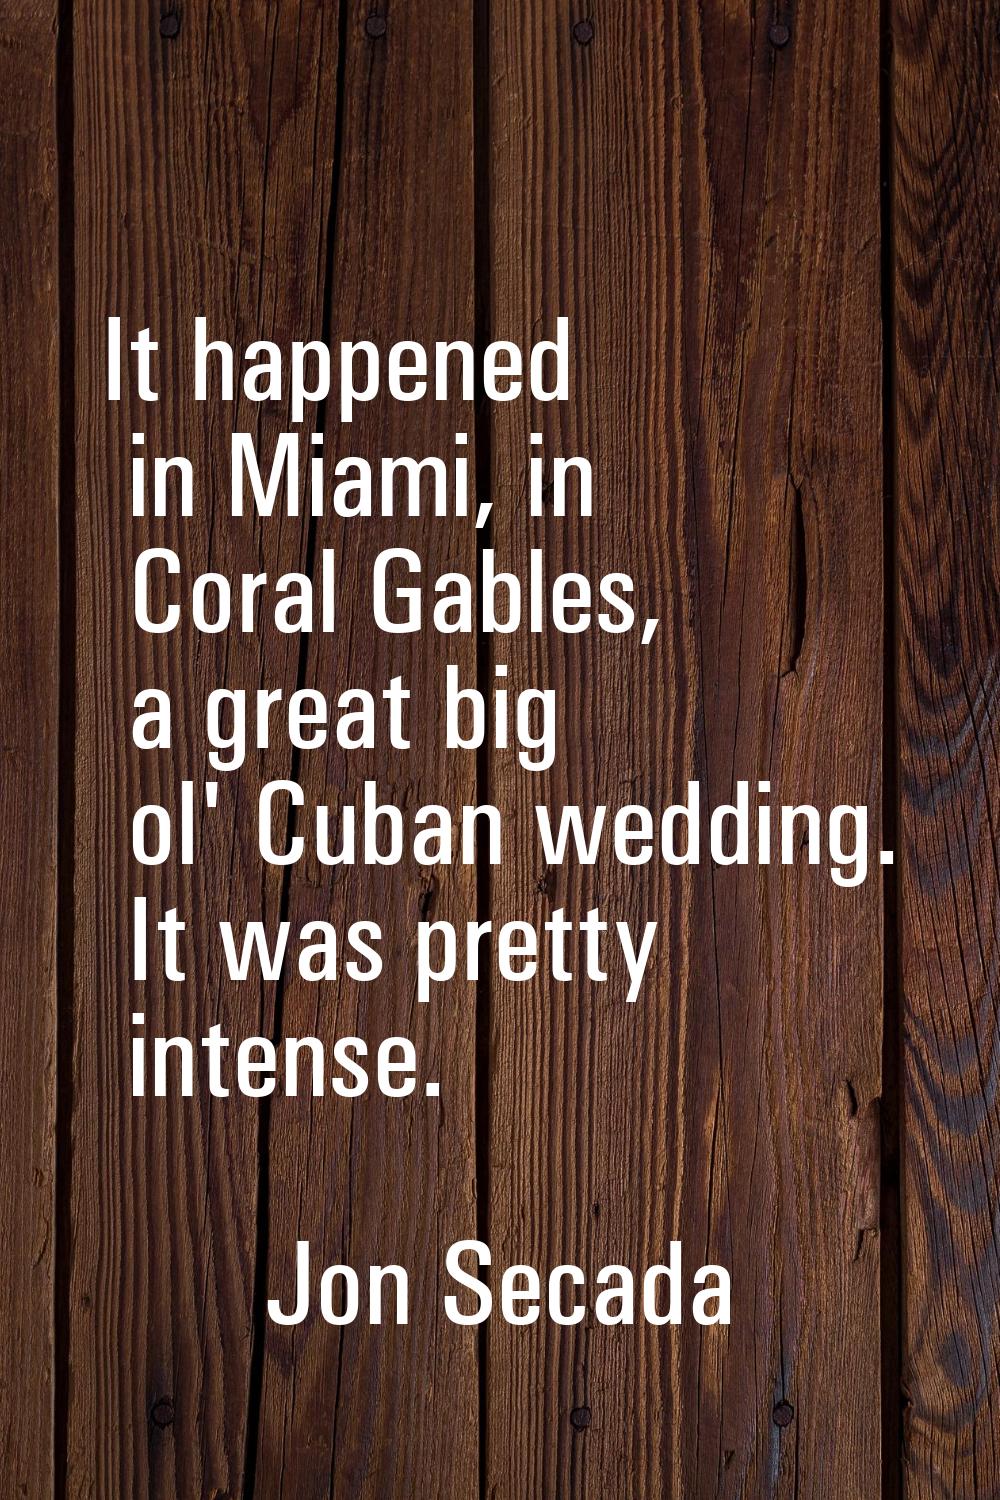 It happened in Miami, in Coral Gables, a great big ol' Cuban wedding. It was pretty intense.